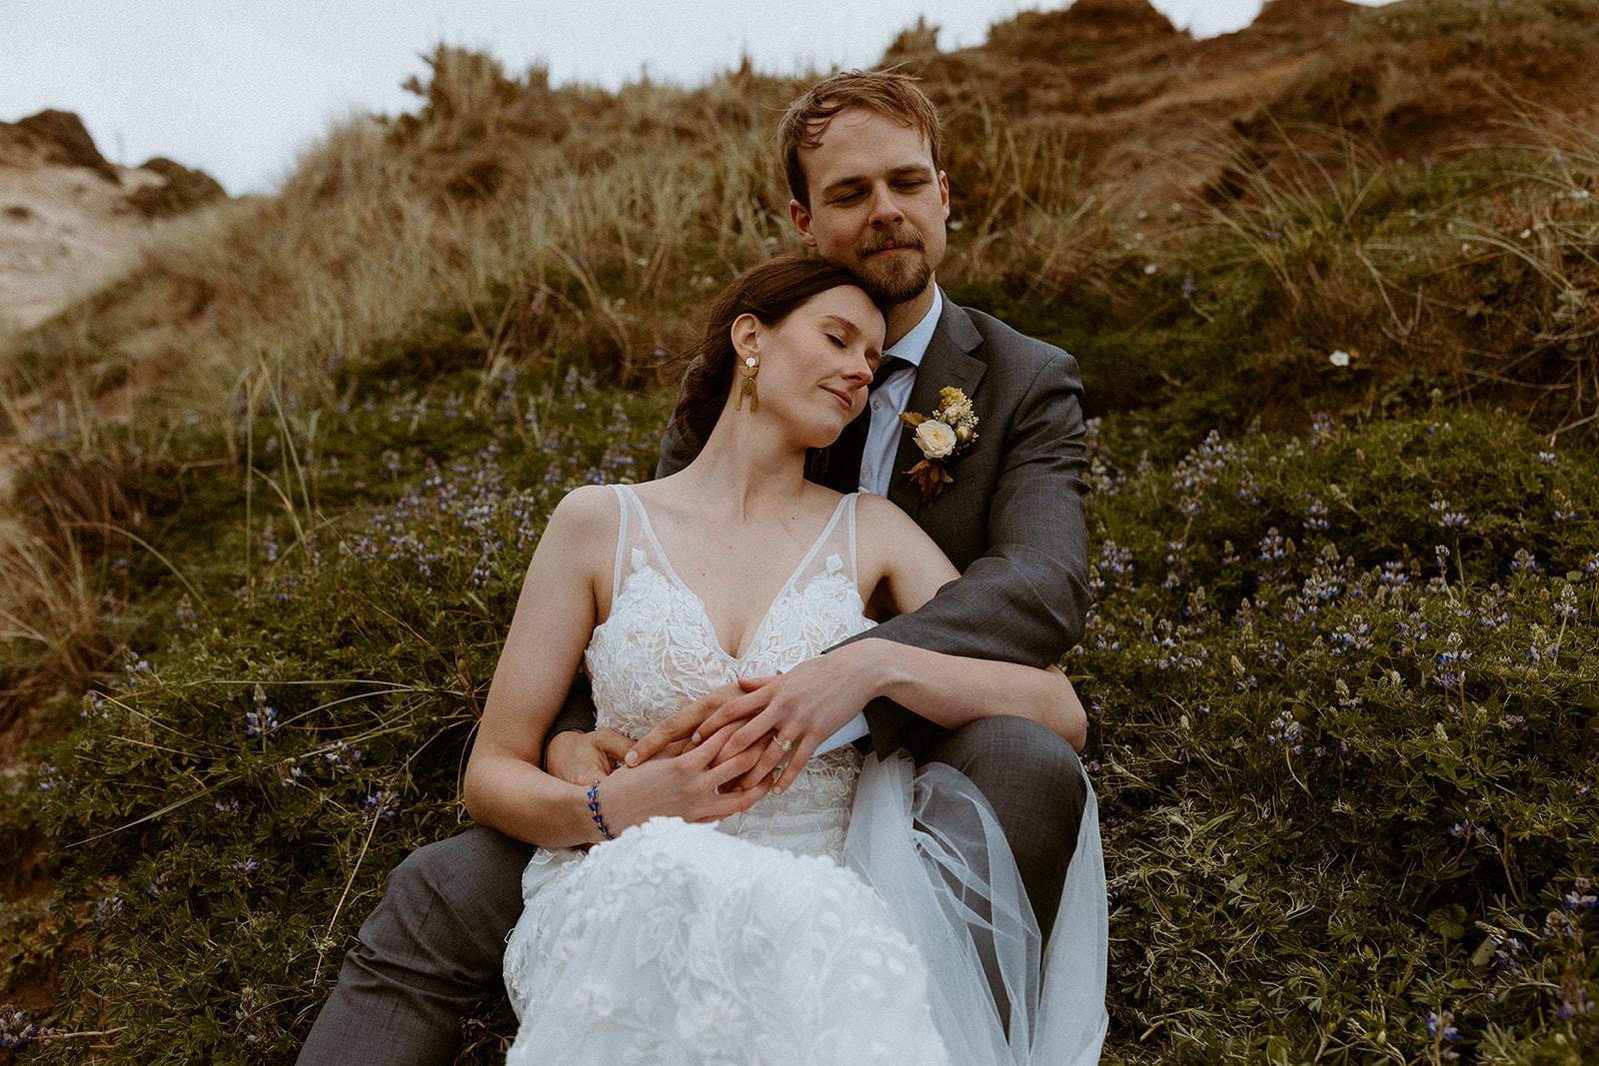 Portland bride with husband in canon beach Oregon for their elopement, wearing effortless hairstyle and natural makeup.